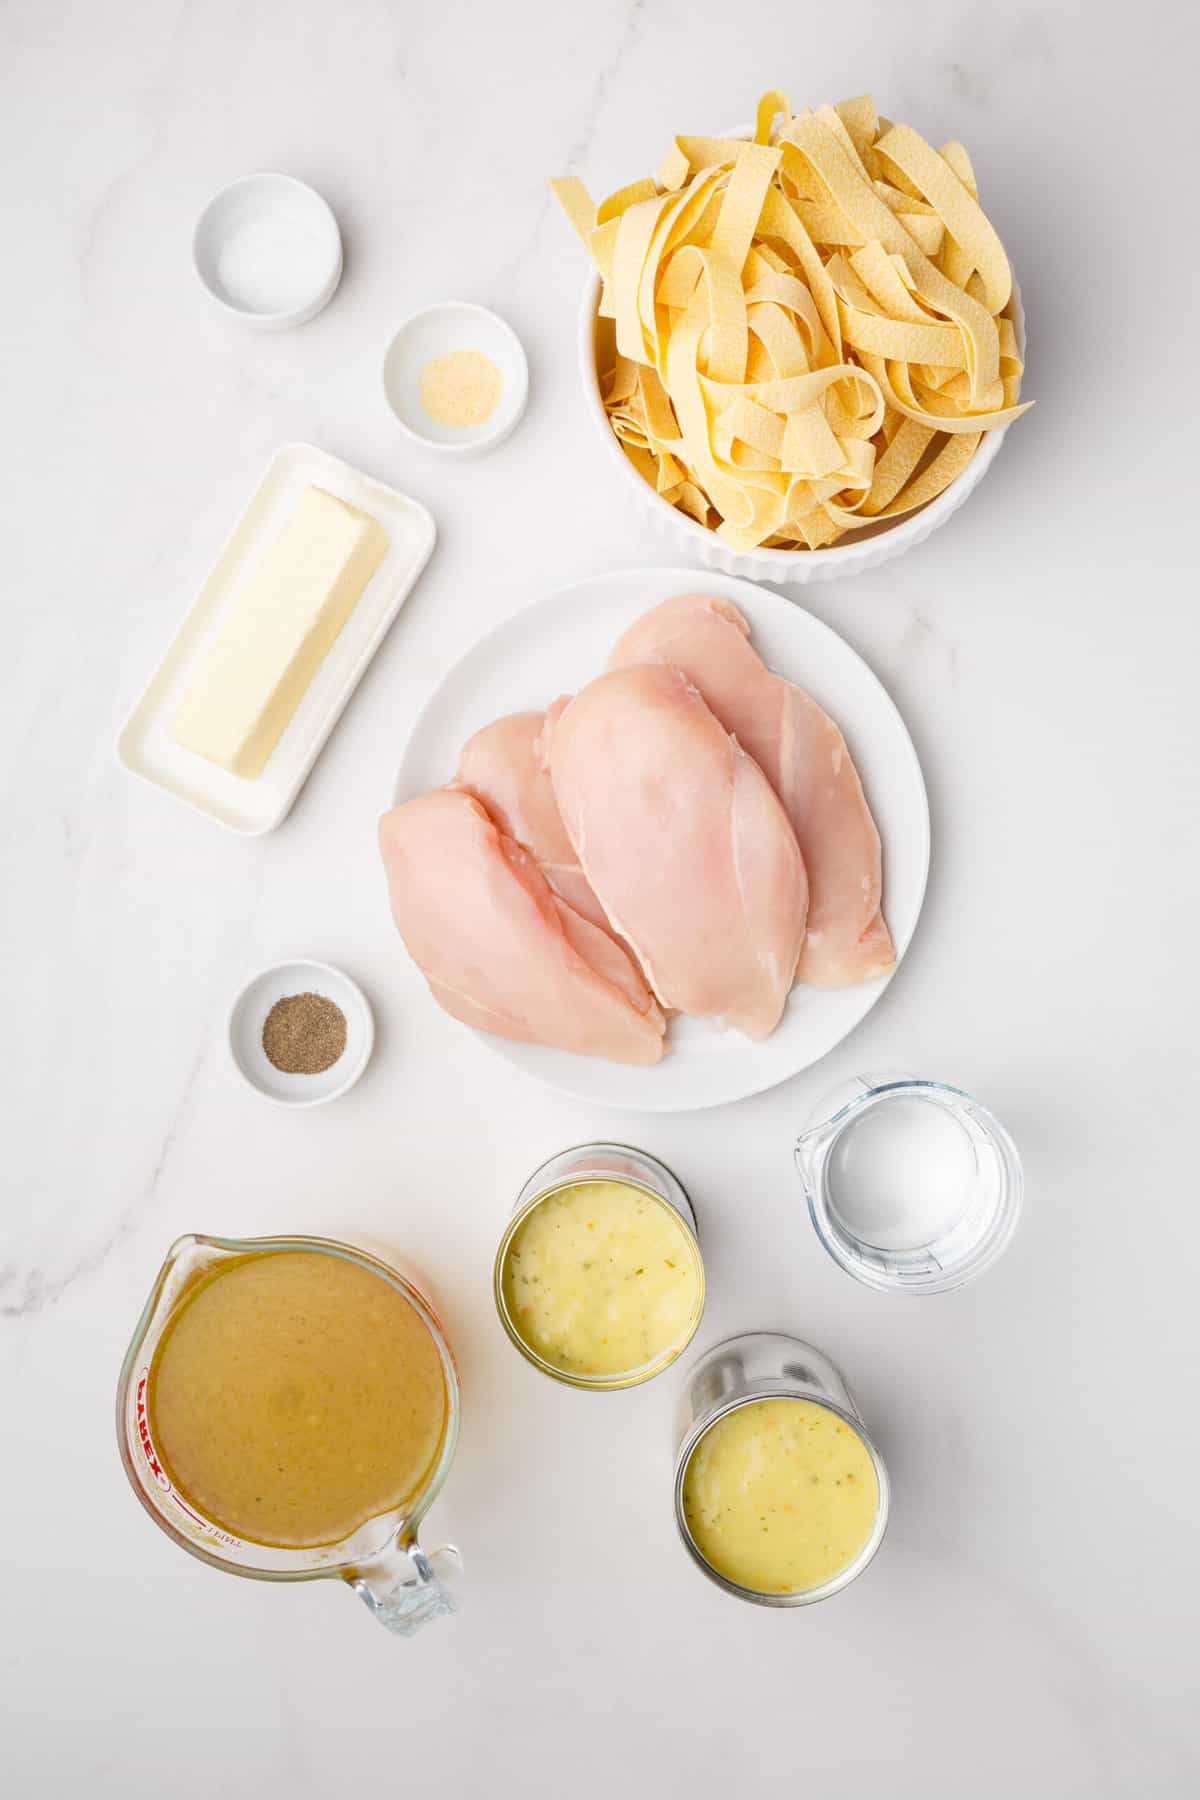 ingredients to make stovetop chicken and noodles.